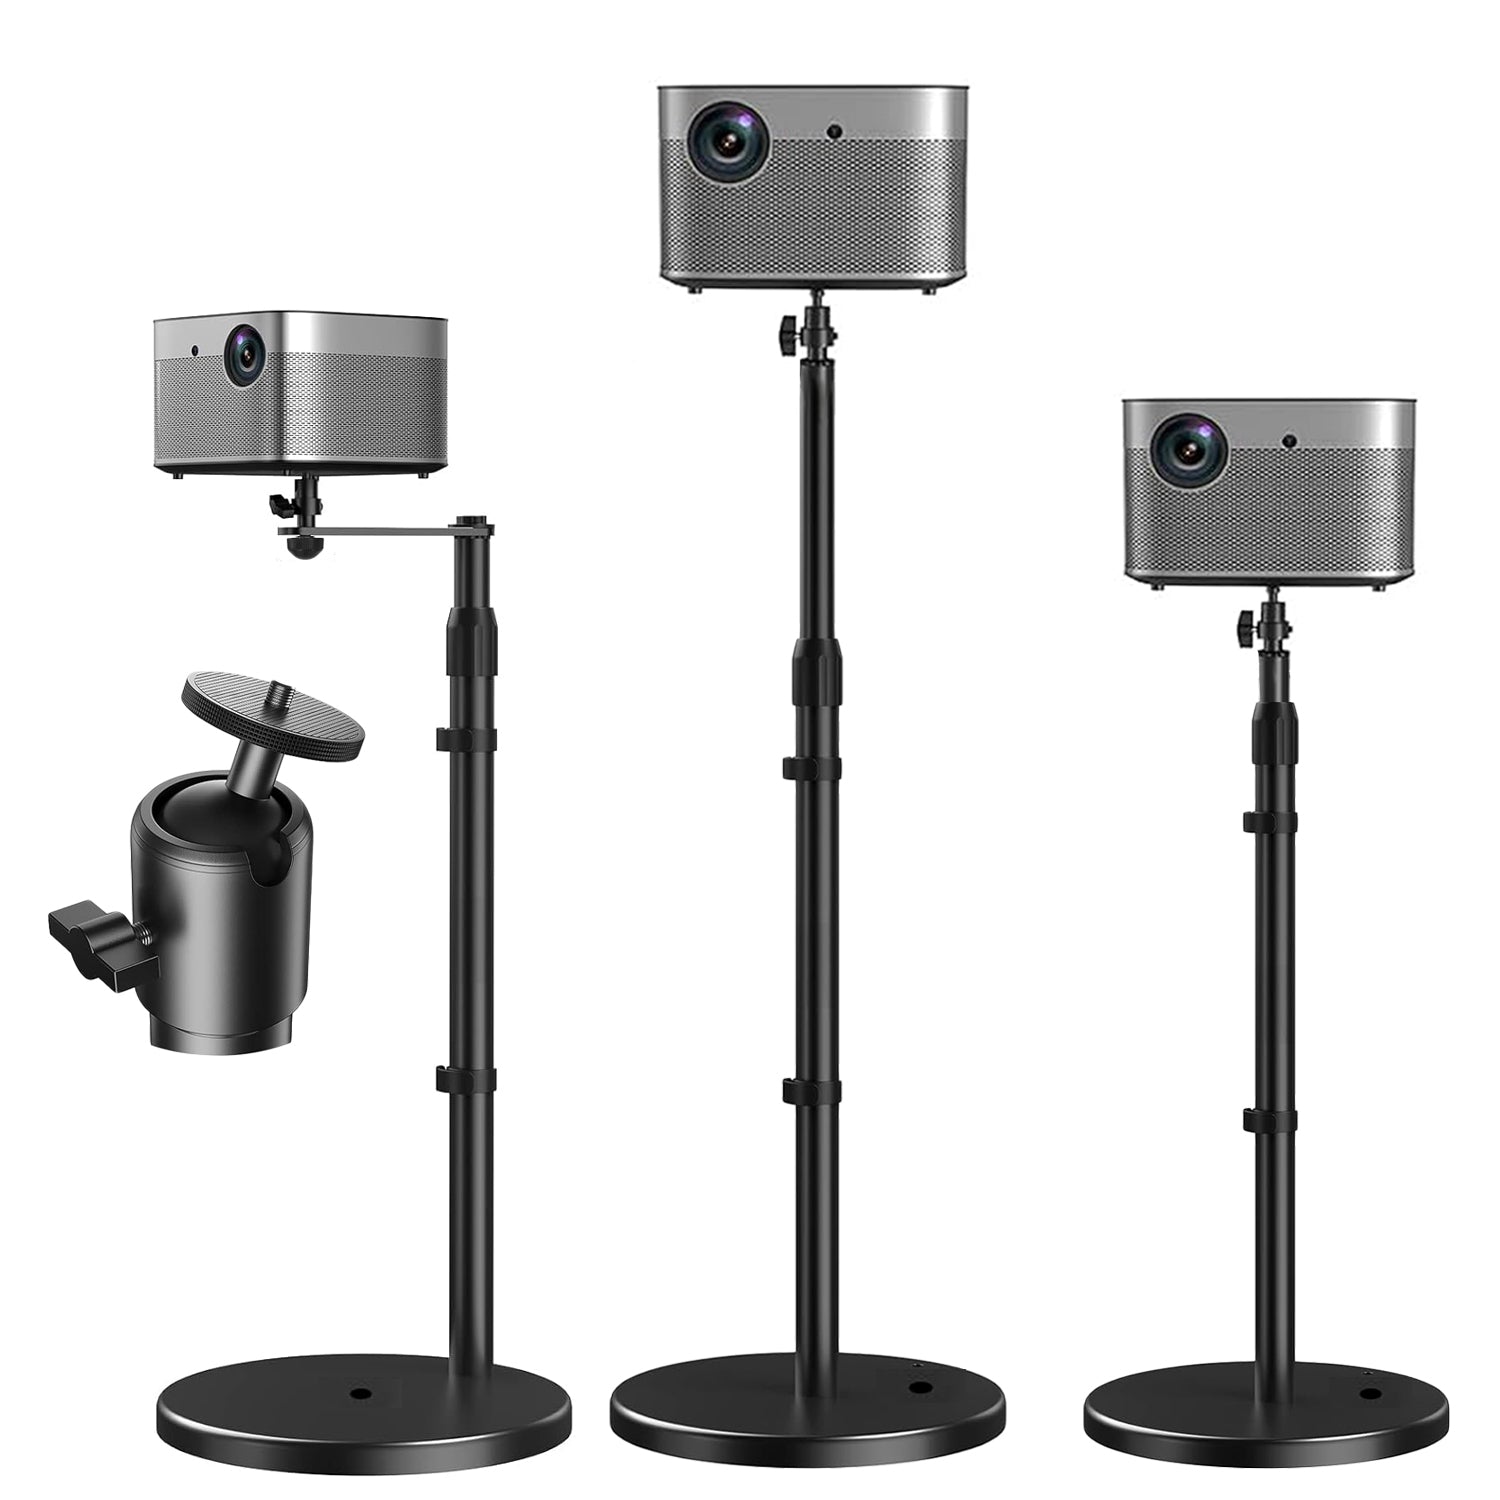 5 Core Projector Stand Height adjustable 28"-52"  Tall Floor Stands w 3 Mounting Options 360° Rotatable Ball Head Heavy Duty Multipurpose Soporte Para Proyector for Home Office Outdoor 1PC Black – PS FLR RB BLK